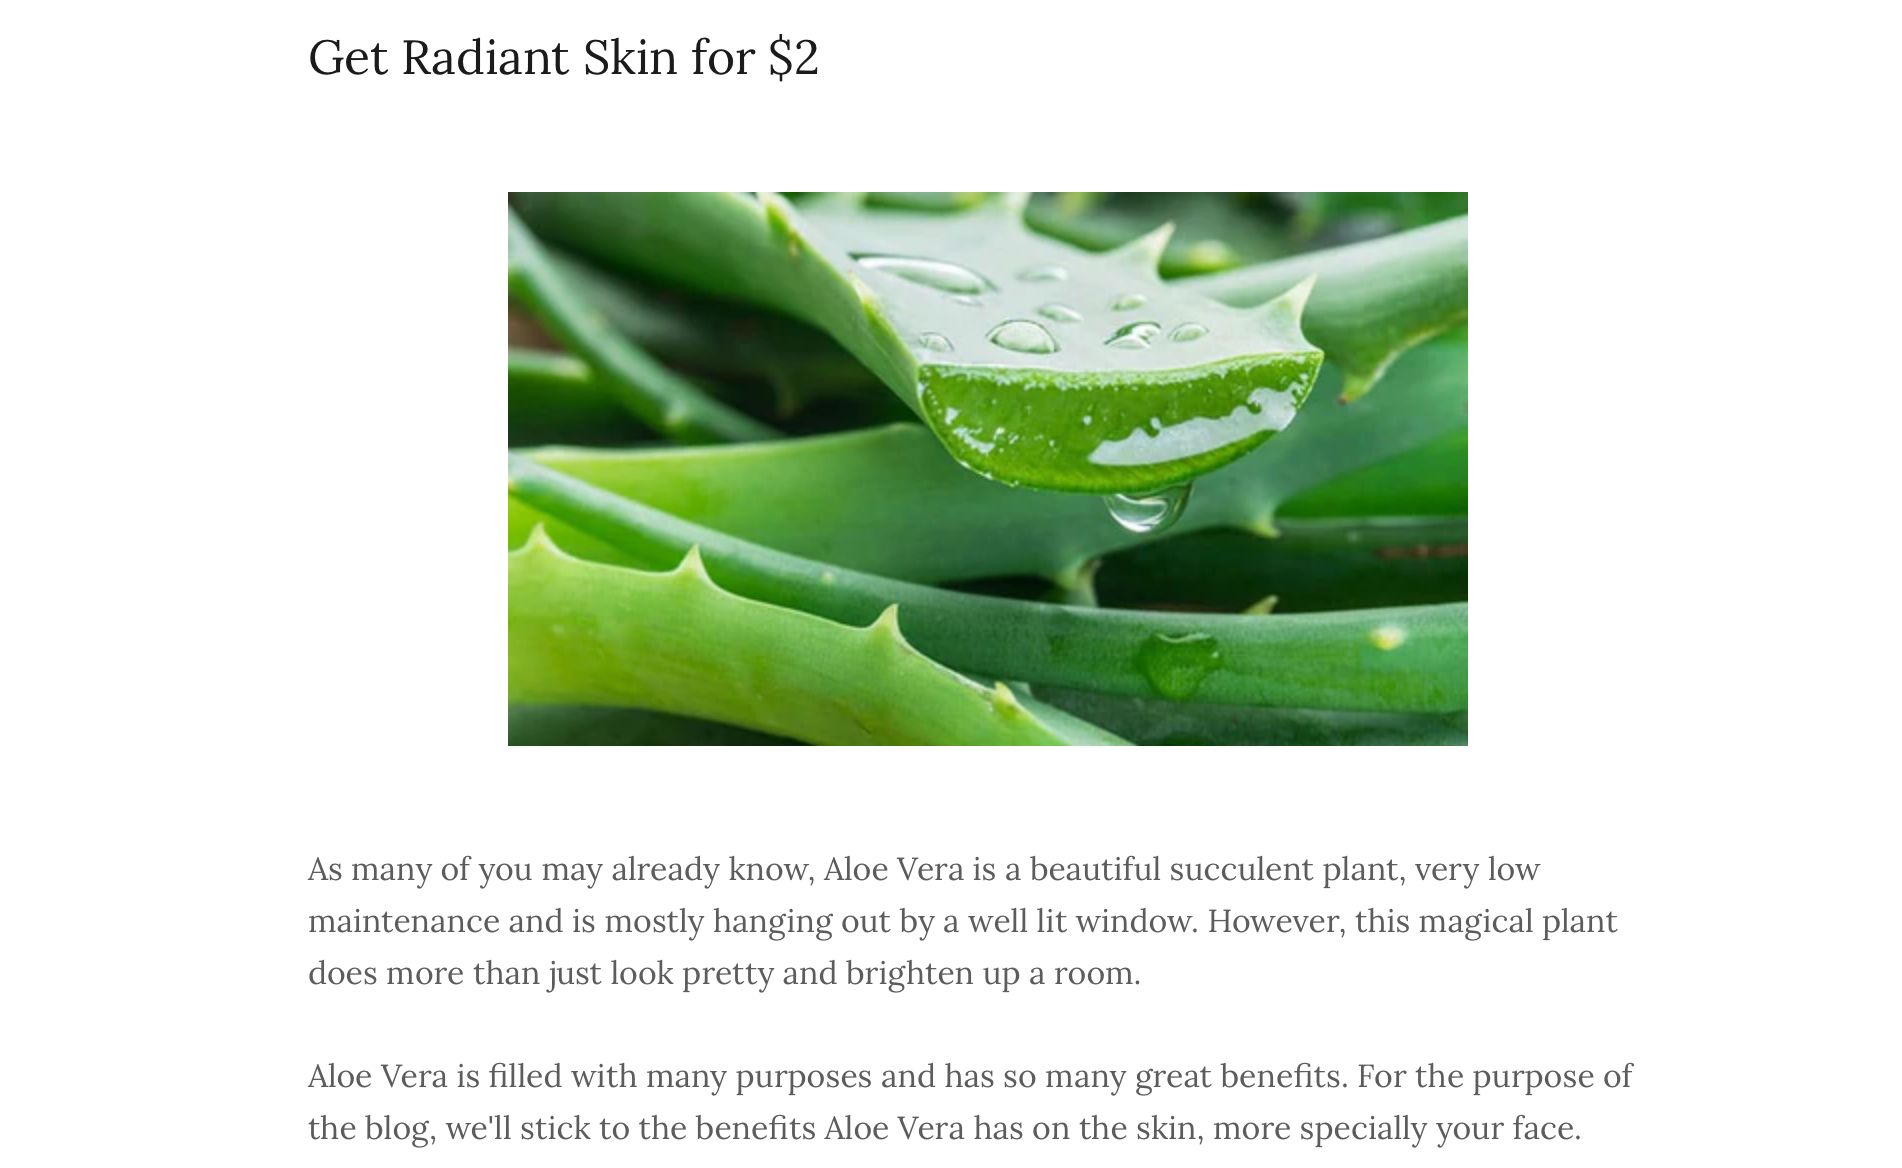 Aloe Vera Face Mask recipe by Vilot Skin Collagen Firming skincare brand that will help anti aging anti wrinkle hydration eczema hyperpigmentation. This Face Mask recipe is inexpensive and highly effective against skin issues such as acne, dry skin, psoriasis, hyperpigmentation. Aloe Vera Face Mask is an organic mask